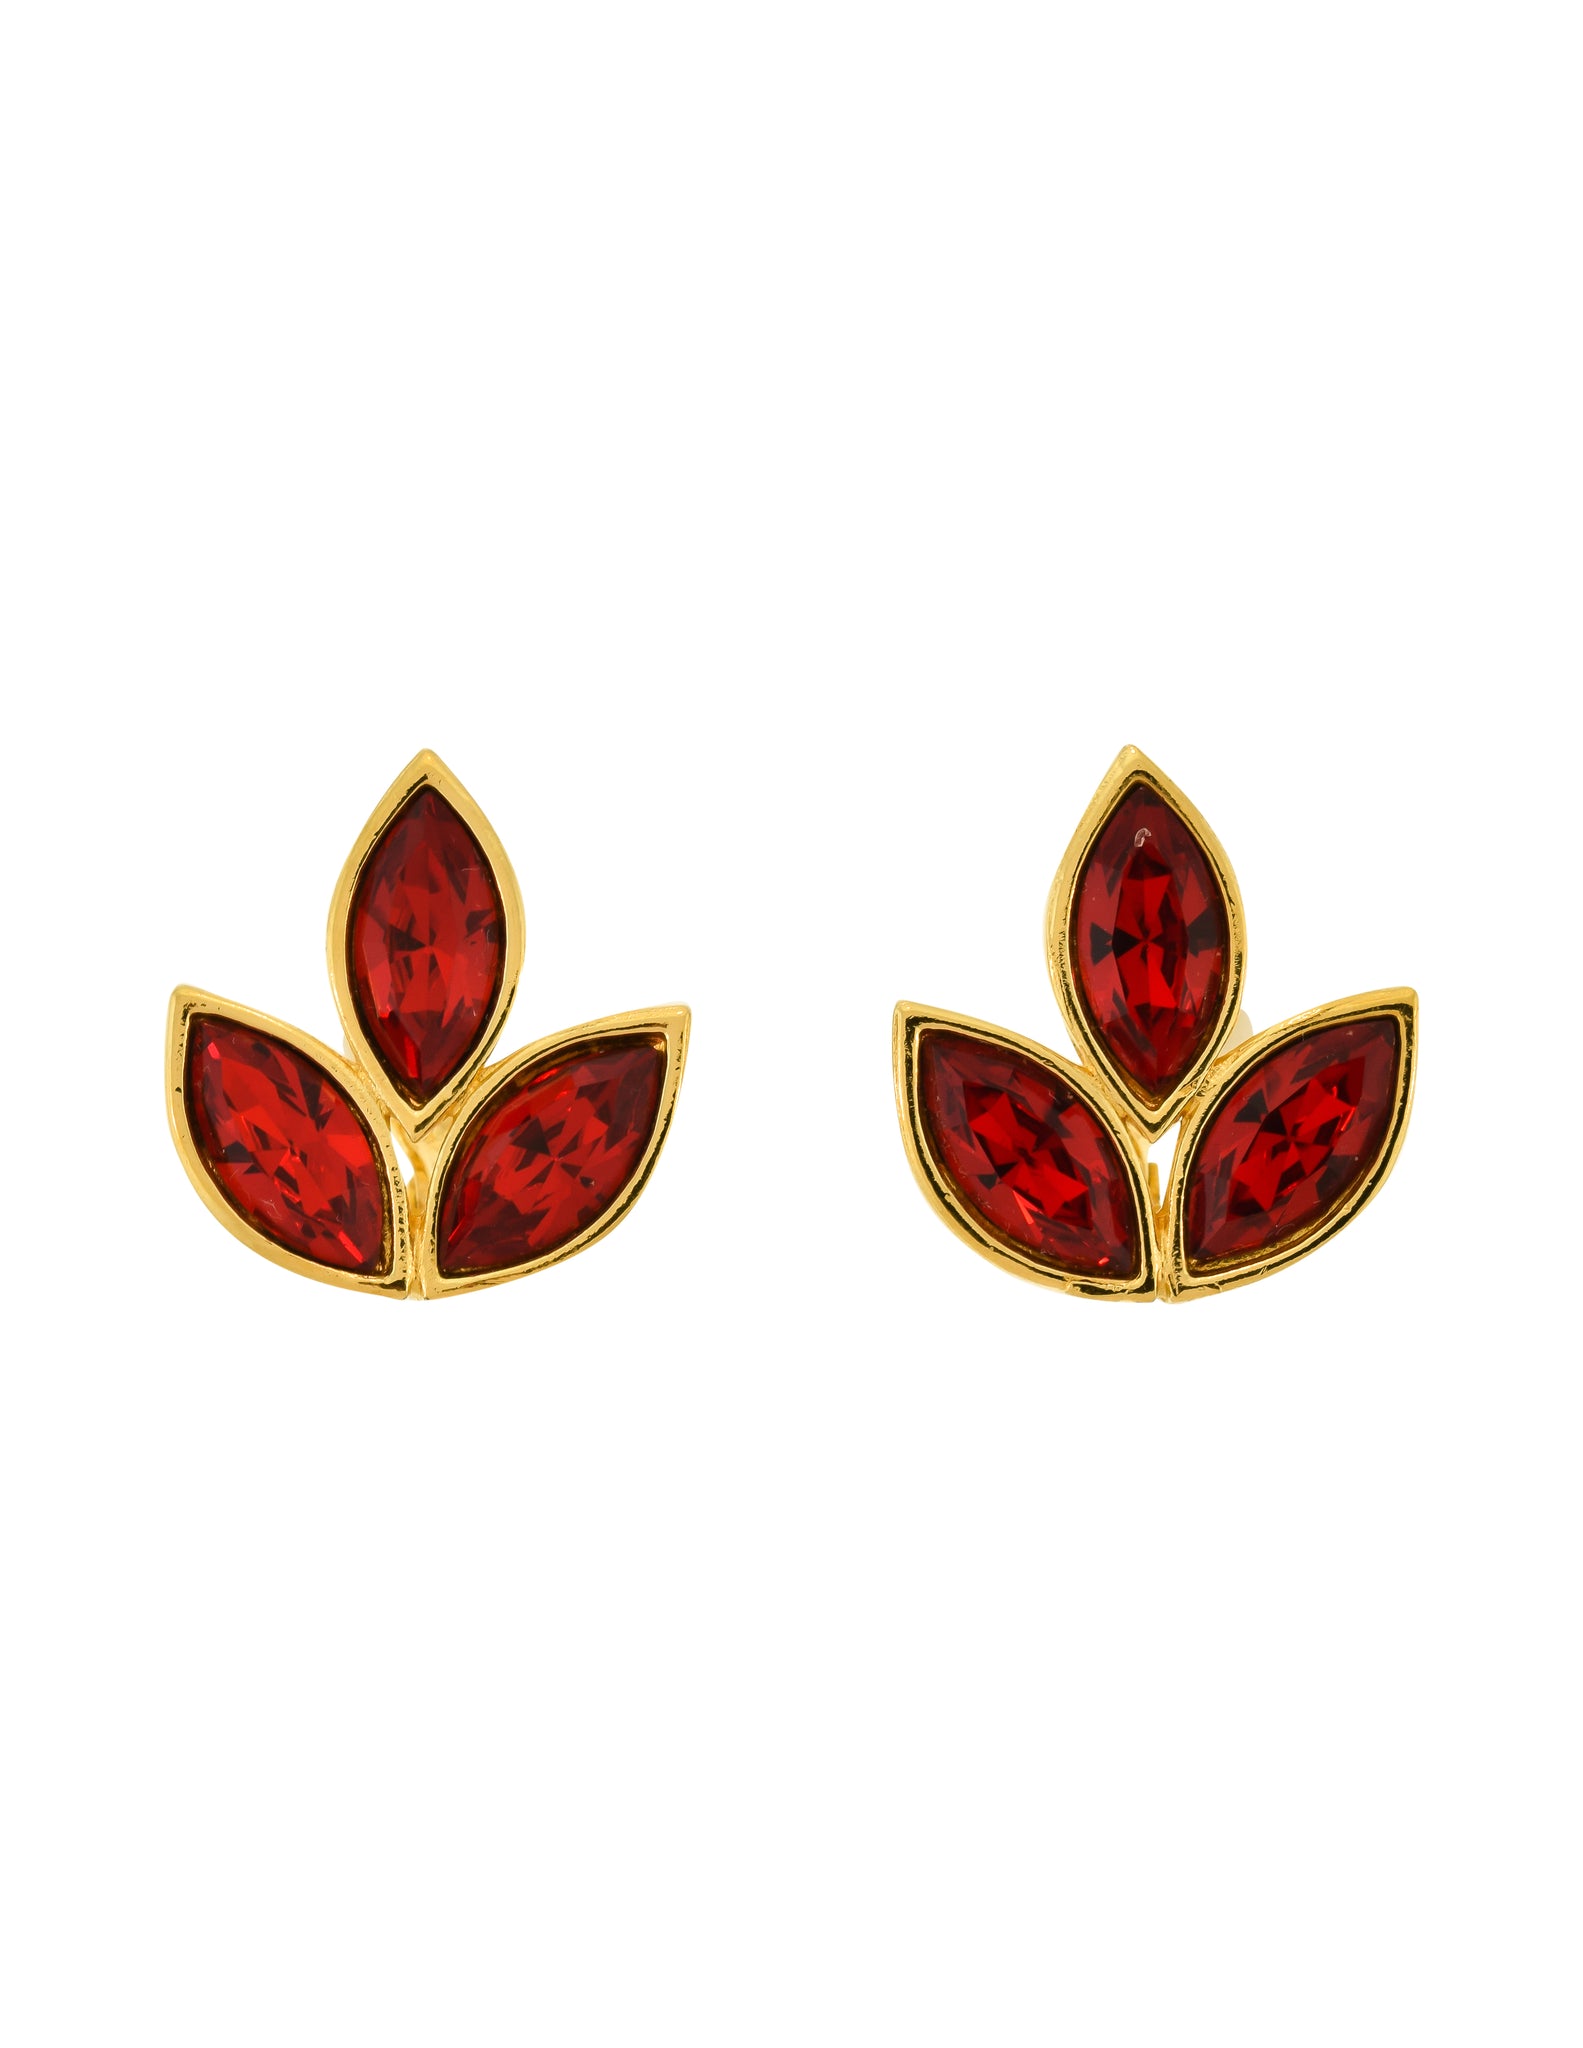 Yves Saint Laurent Vintage Gold Red Crystal Three Point Earrings